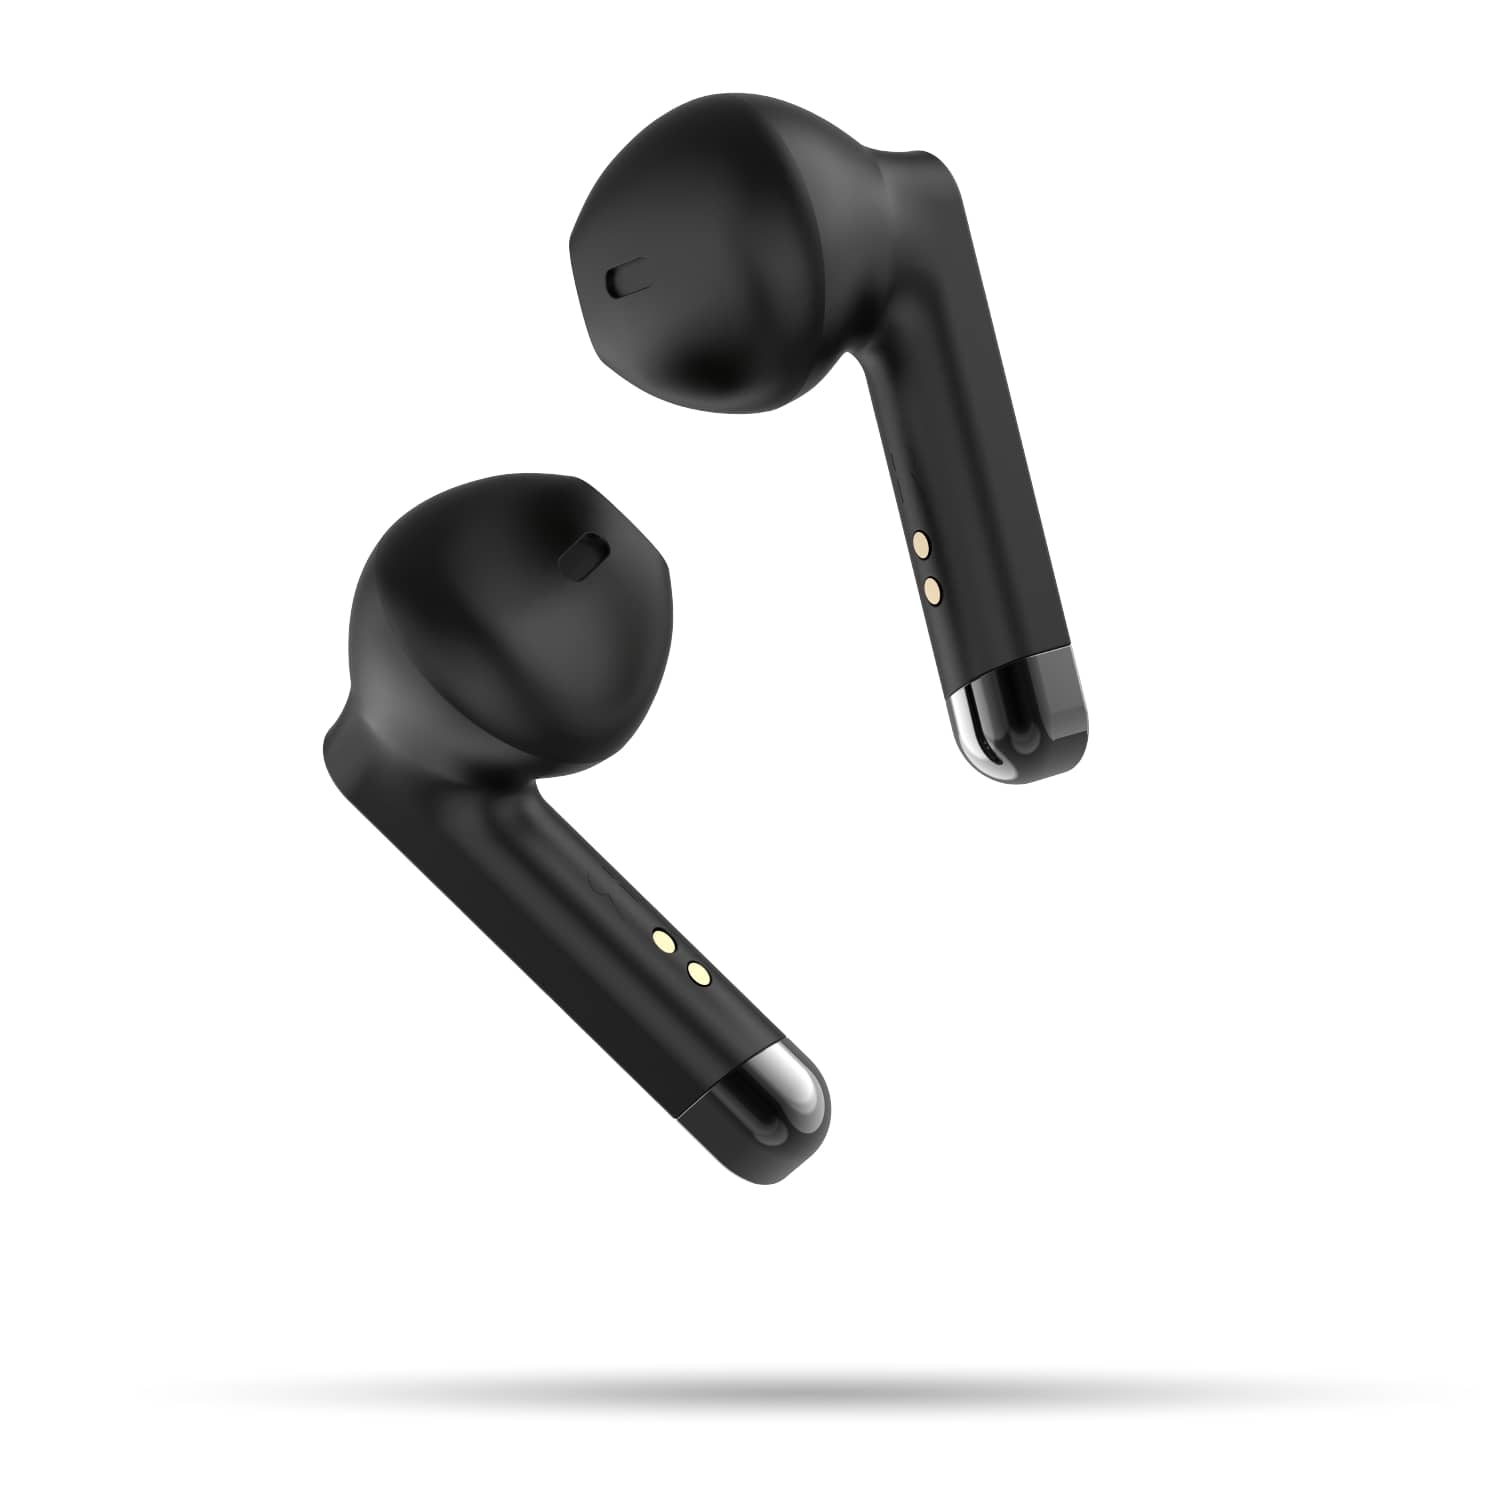 iTouch Amp Plus Earbuds: Black/Gunmetal affordable wireless ear buds